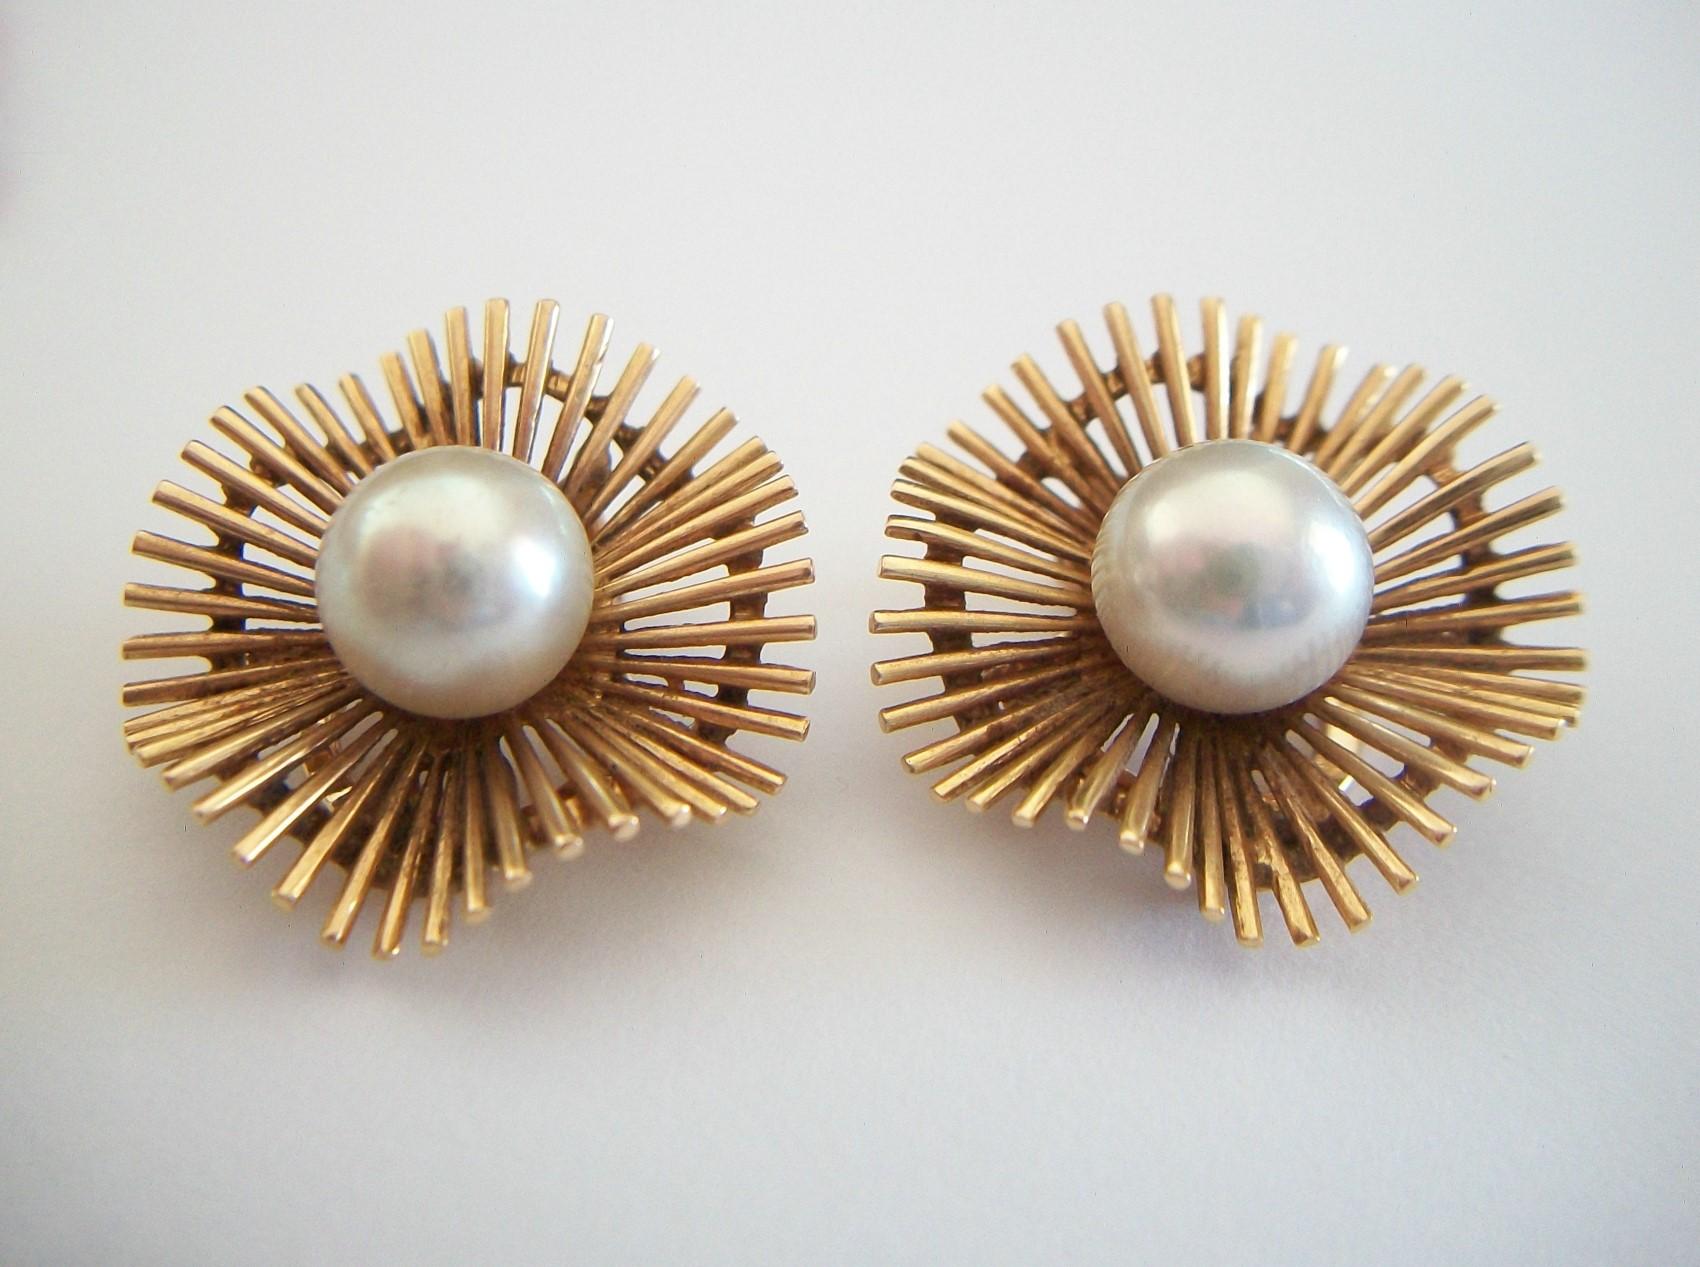 Modernist Starburst cultured pearl and 18K yellow gold ear clips - refined and elegant - fine hand made quality - each ear clip featuring a cultured pearl (approx. 8 mm. in diameter) to the center, surrounded by undulating gold bars secured in place